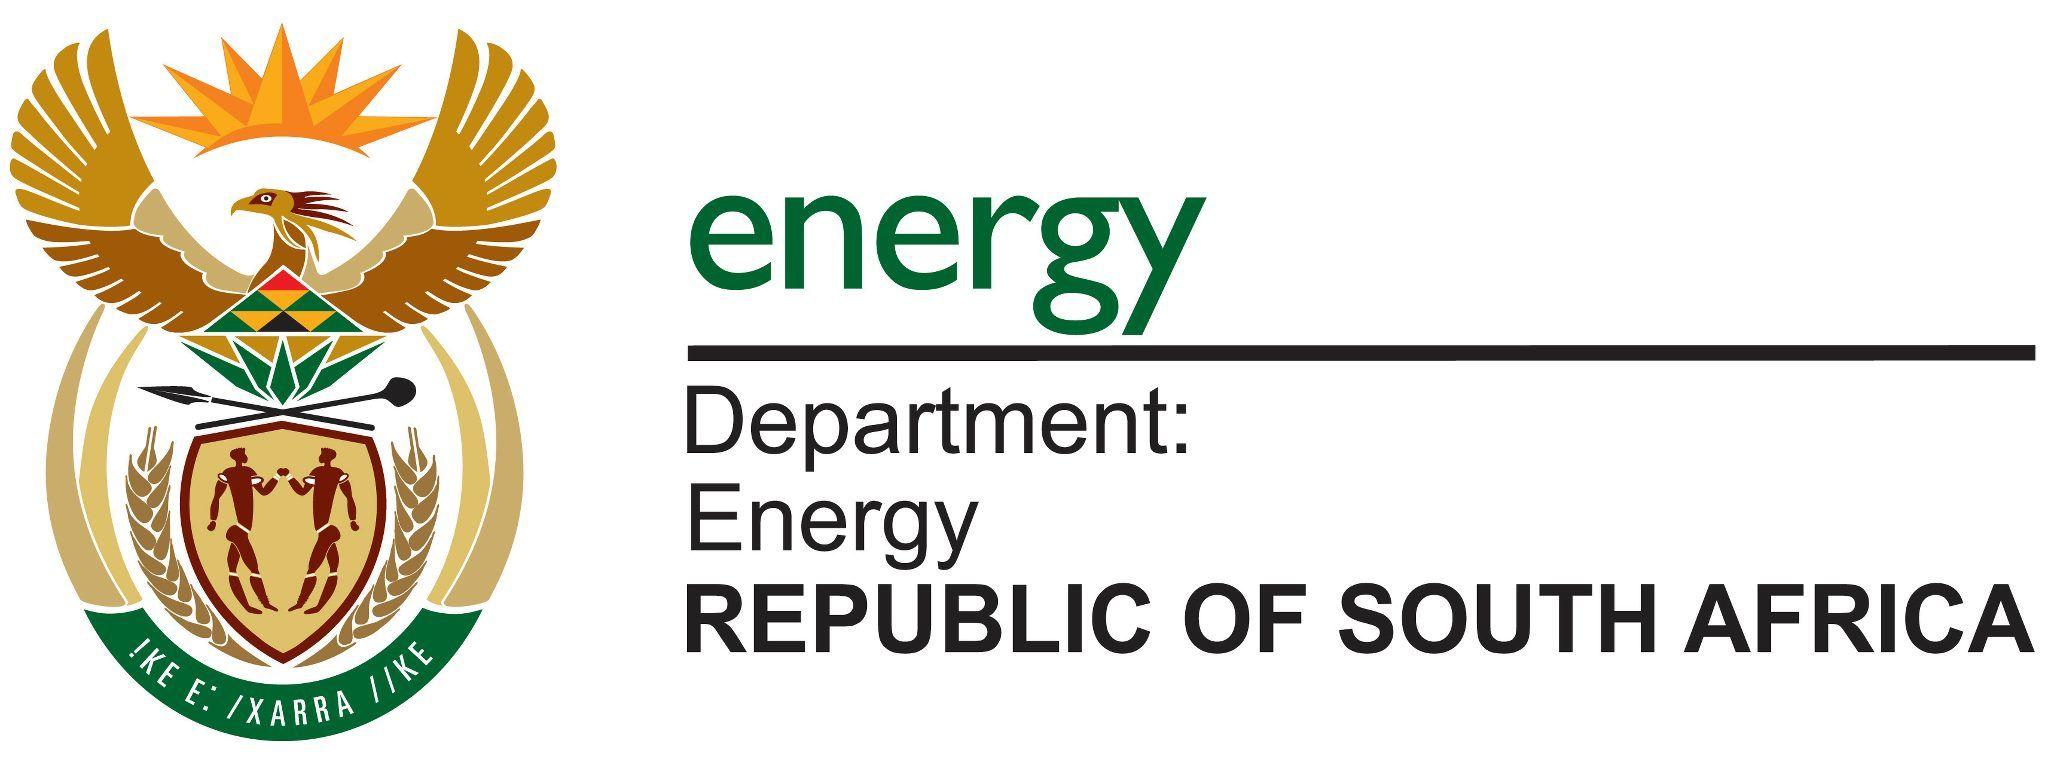 Department of Energy Logo - Remarks by the Director General of the Department of Energy; Mr